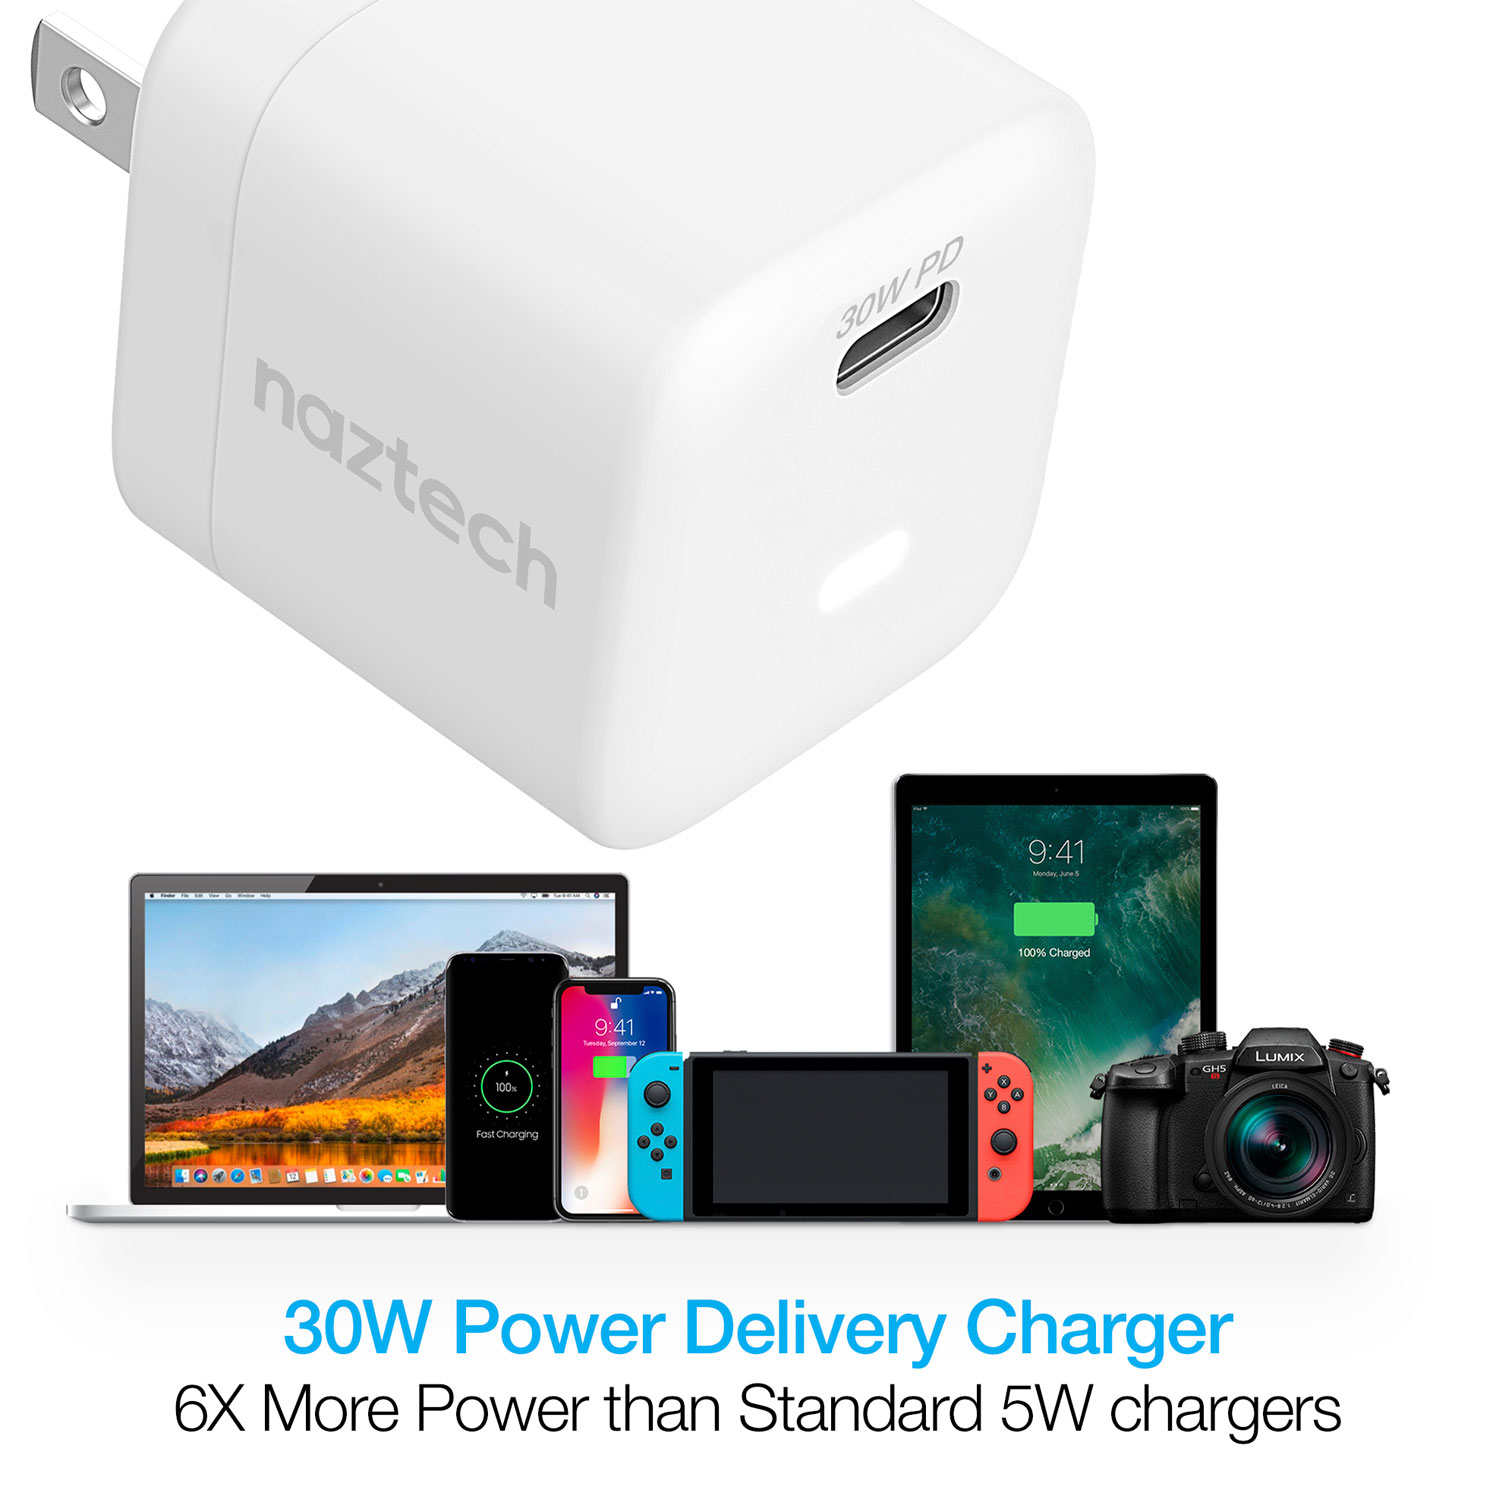 Naztech 30W PD Wall Charger + USB-C to Lightning Cable 4ft W